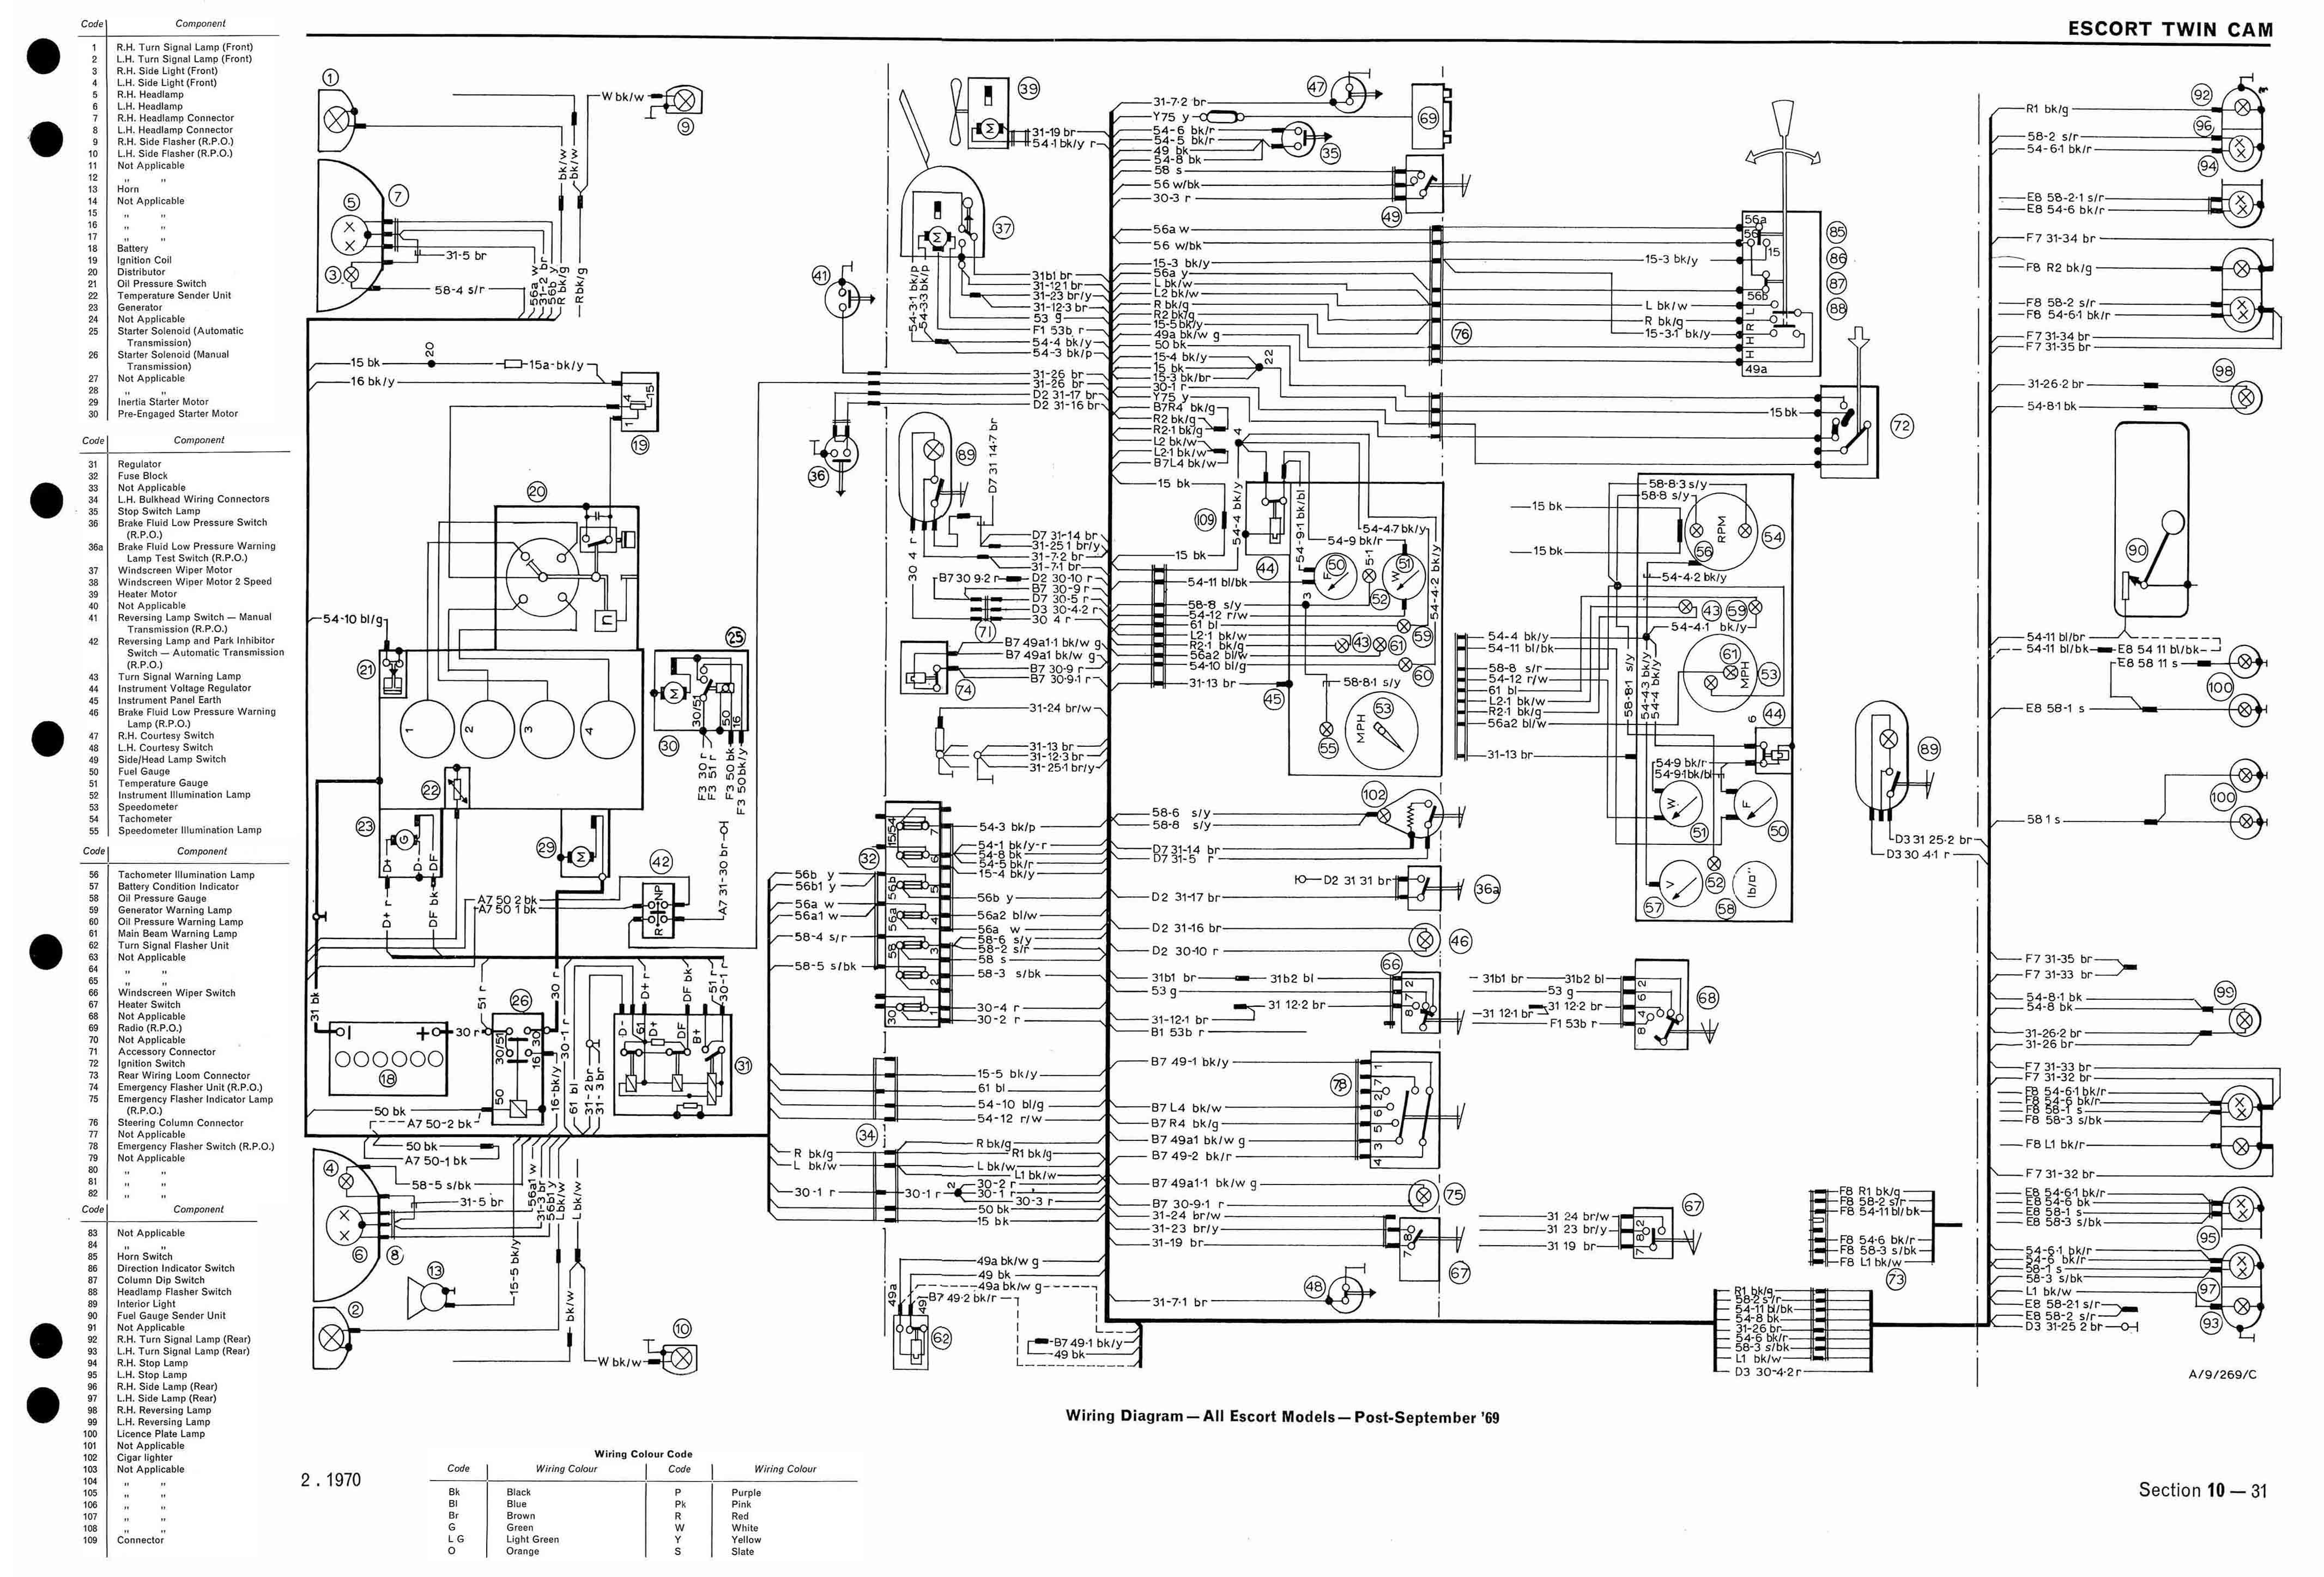 2001 ford Escort Engine Diagram Awesome 1997 ford Escort Wiring Diagram S Everything You Need